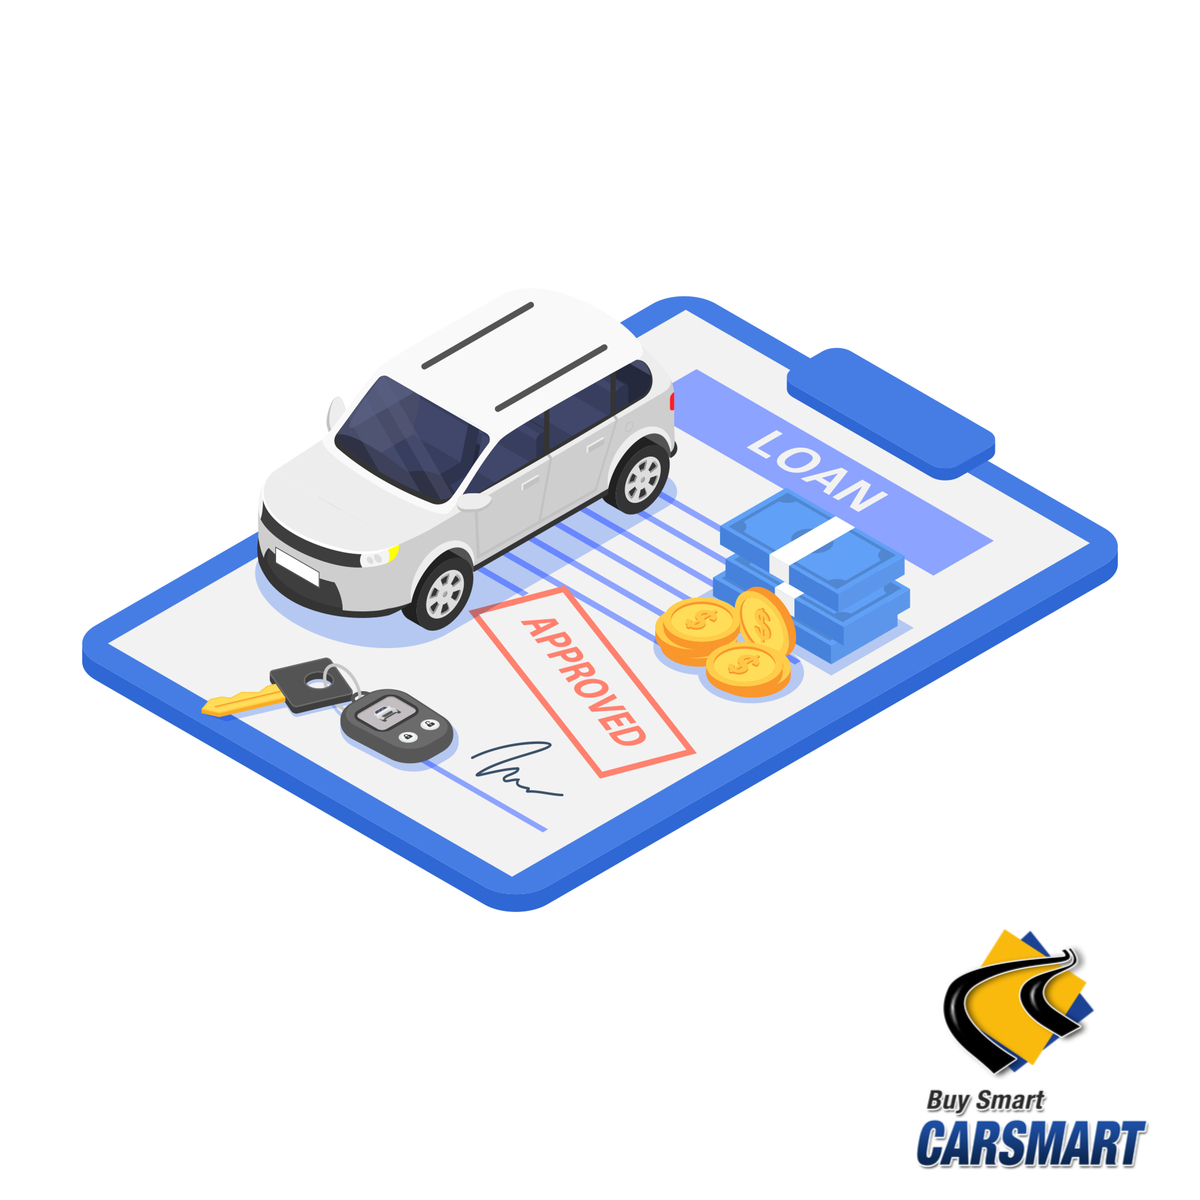 Poor Credit? No Worries! Check Out CarSmart for Reliable Auto Loans!